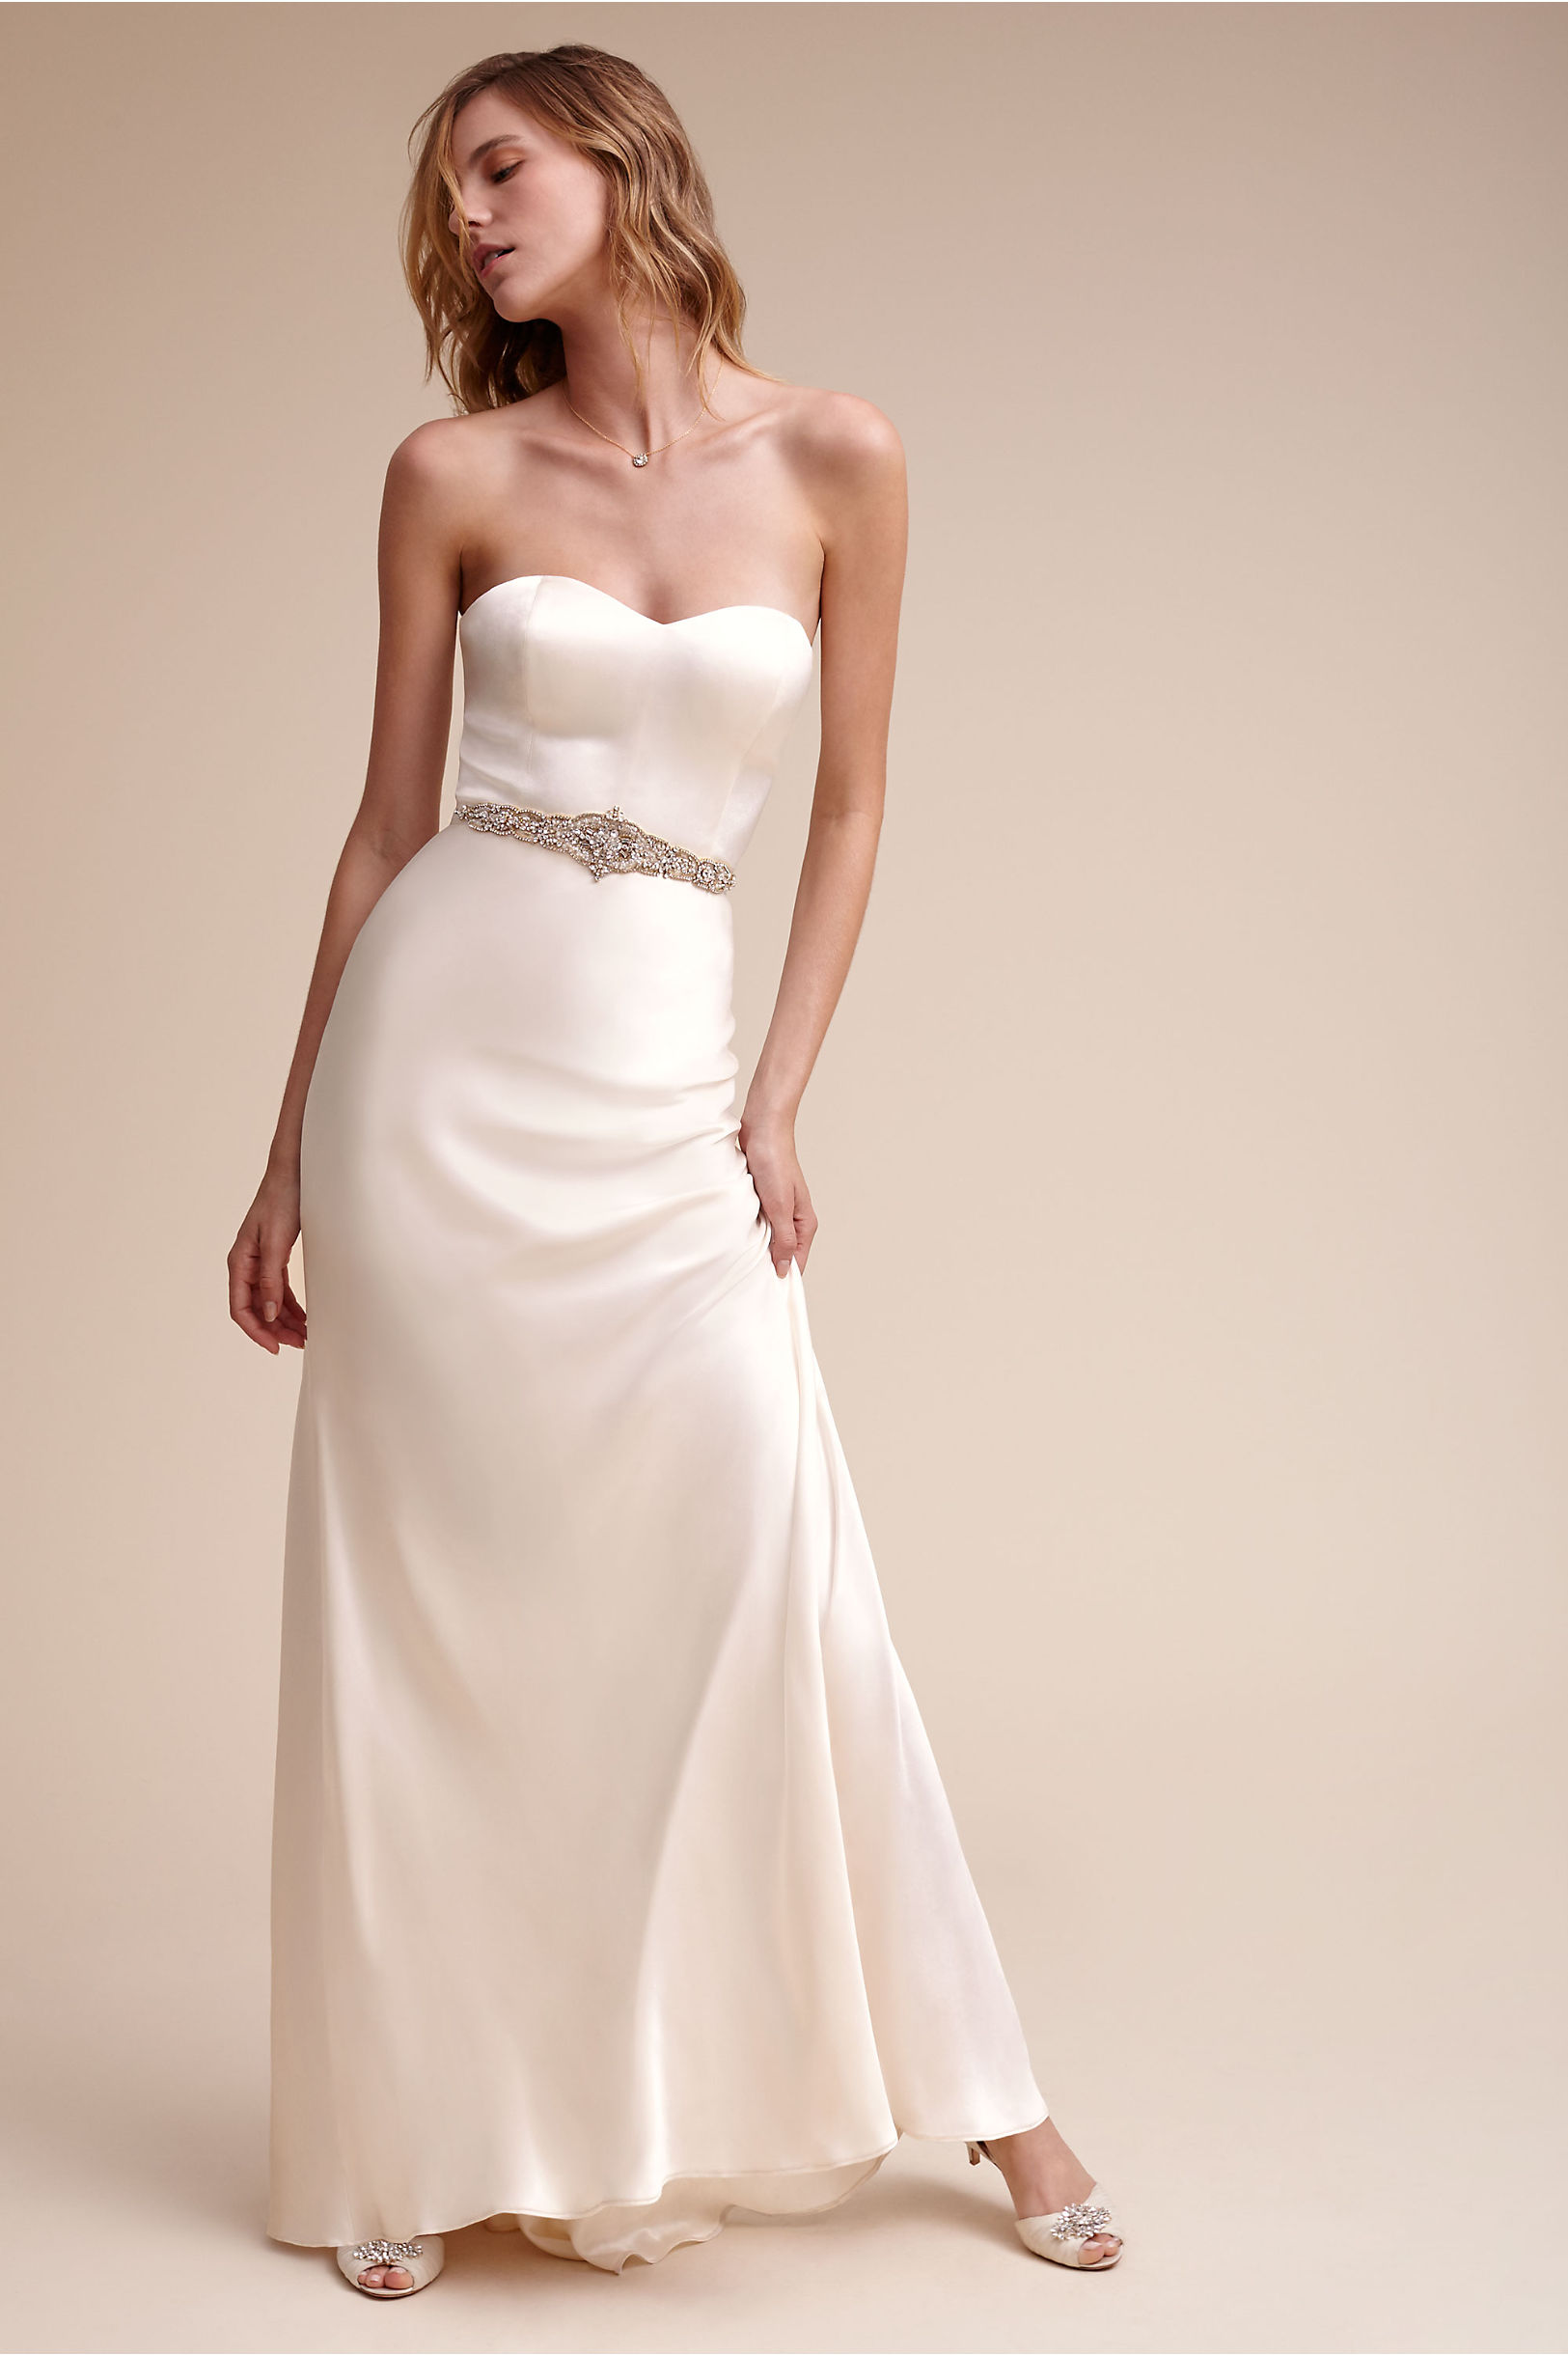 Gina Gown $1050